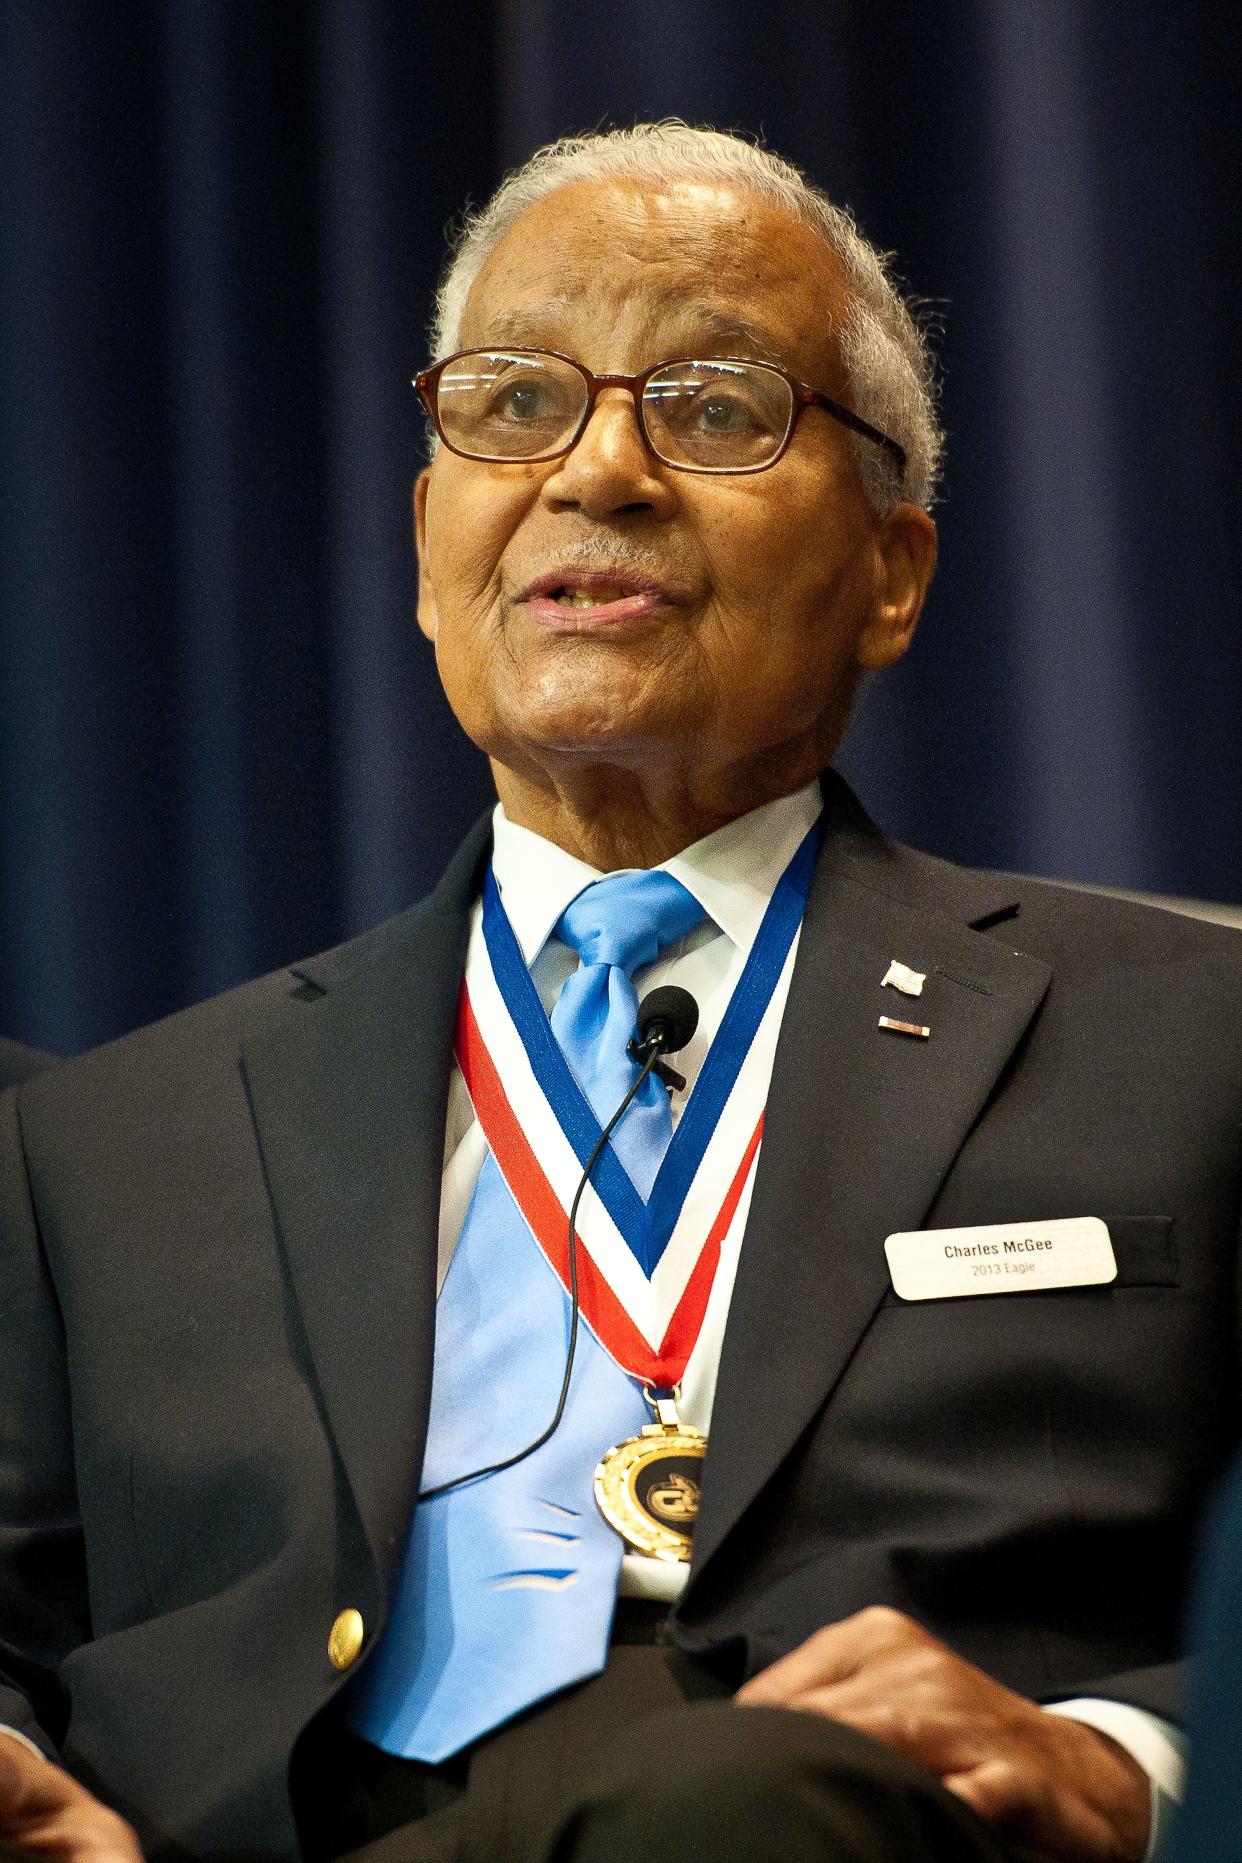 Brig. Gen. McGee started his military career breaking barriers with the 99th Fighter Squadron of the 332nd Fighter Group, the famed "Tuskegee Airmen".